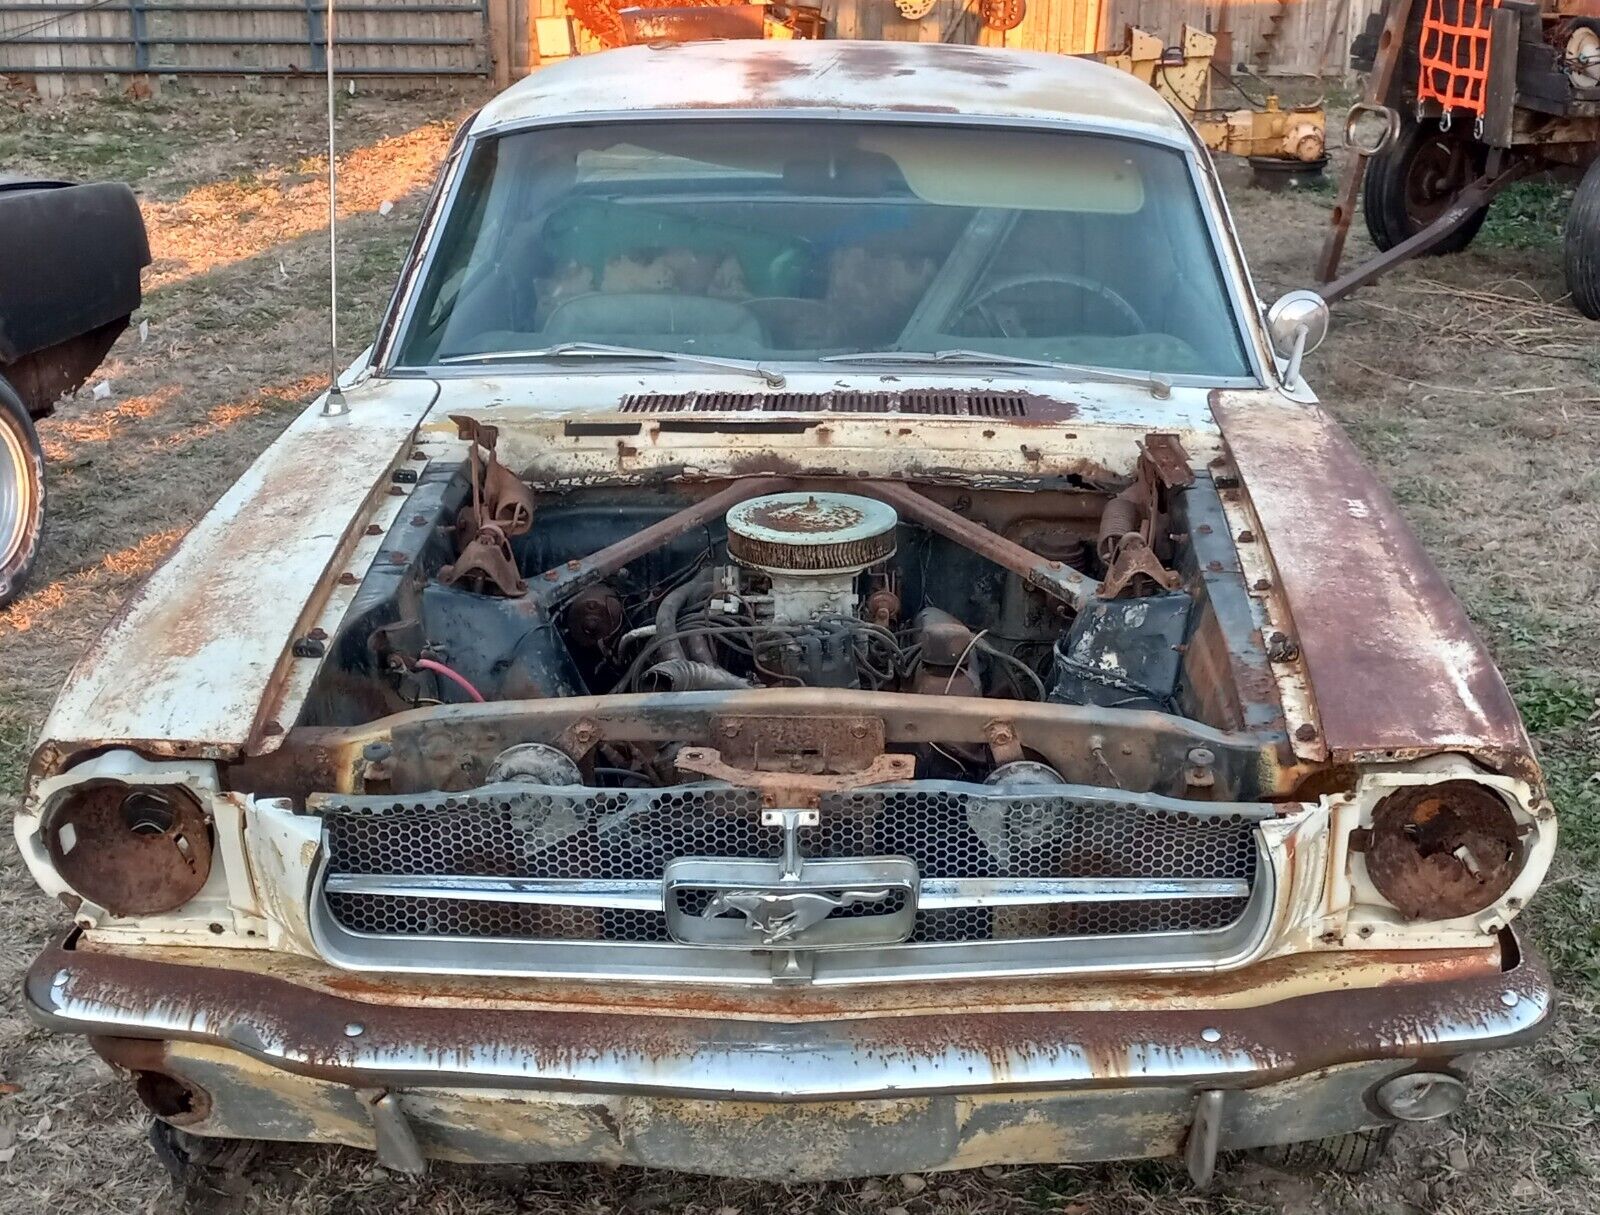 Two Rough 1965 Ford Mustangs Look Ready to Create One Almighty Pony ...